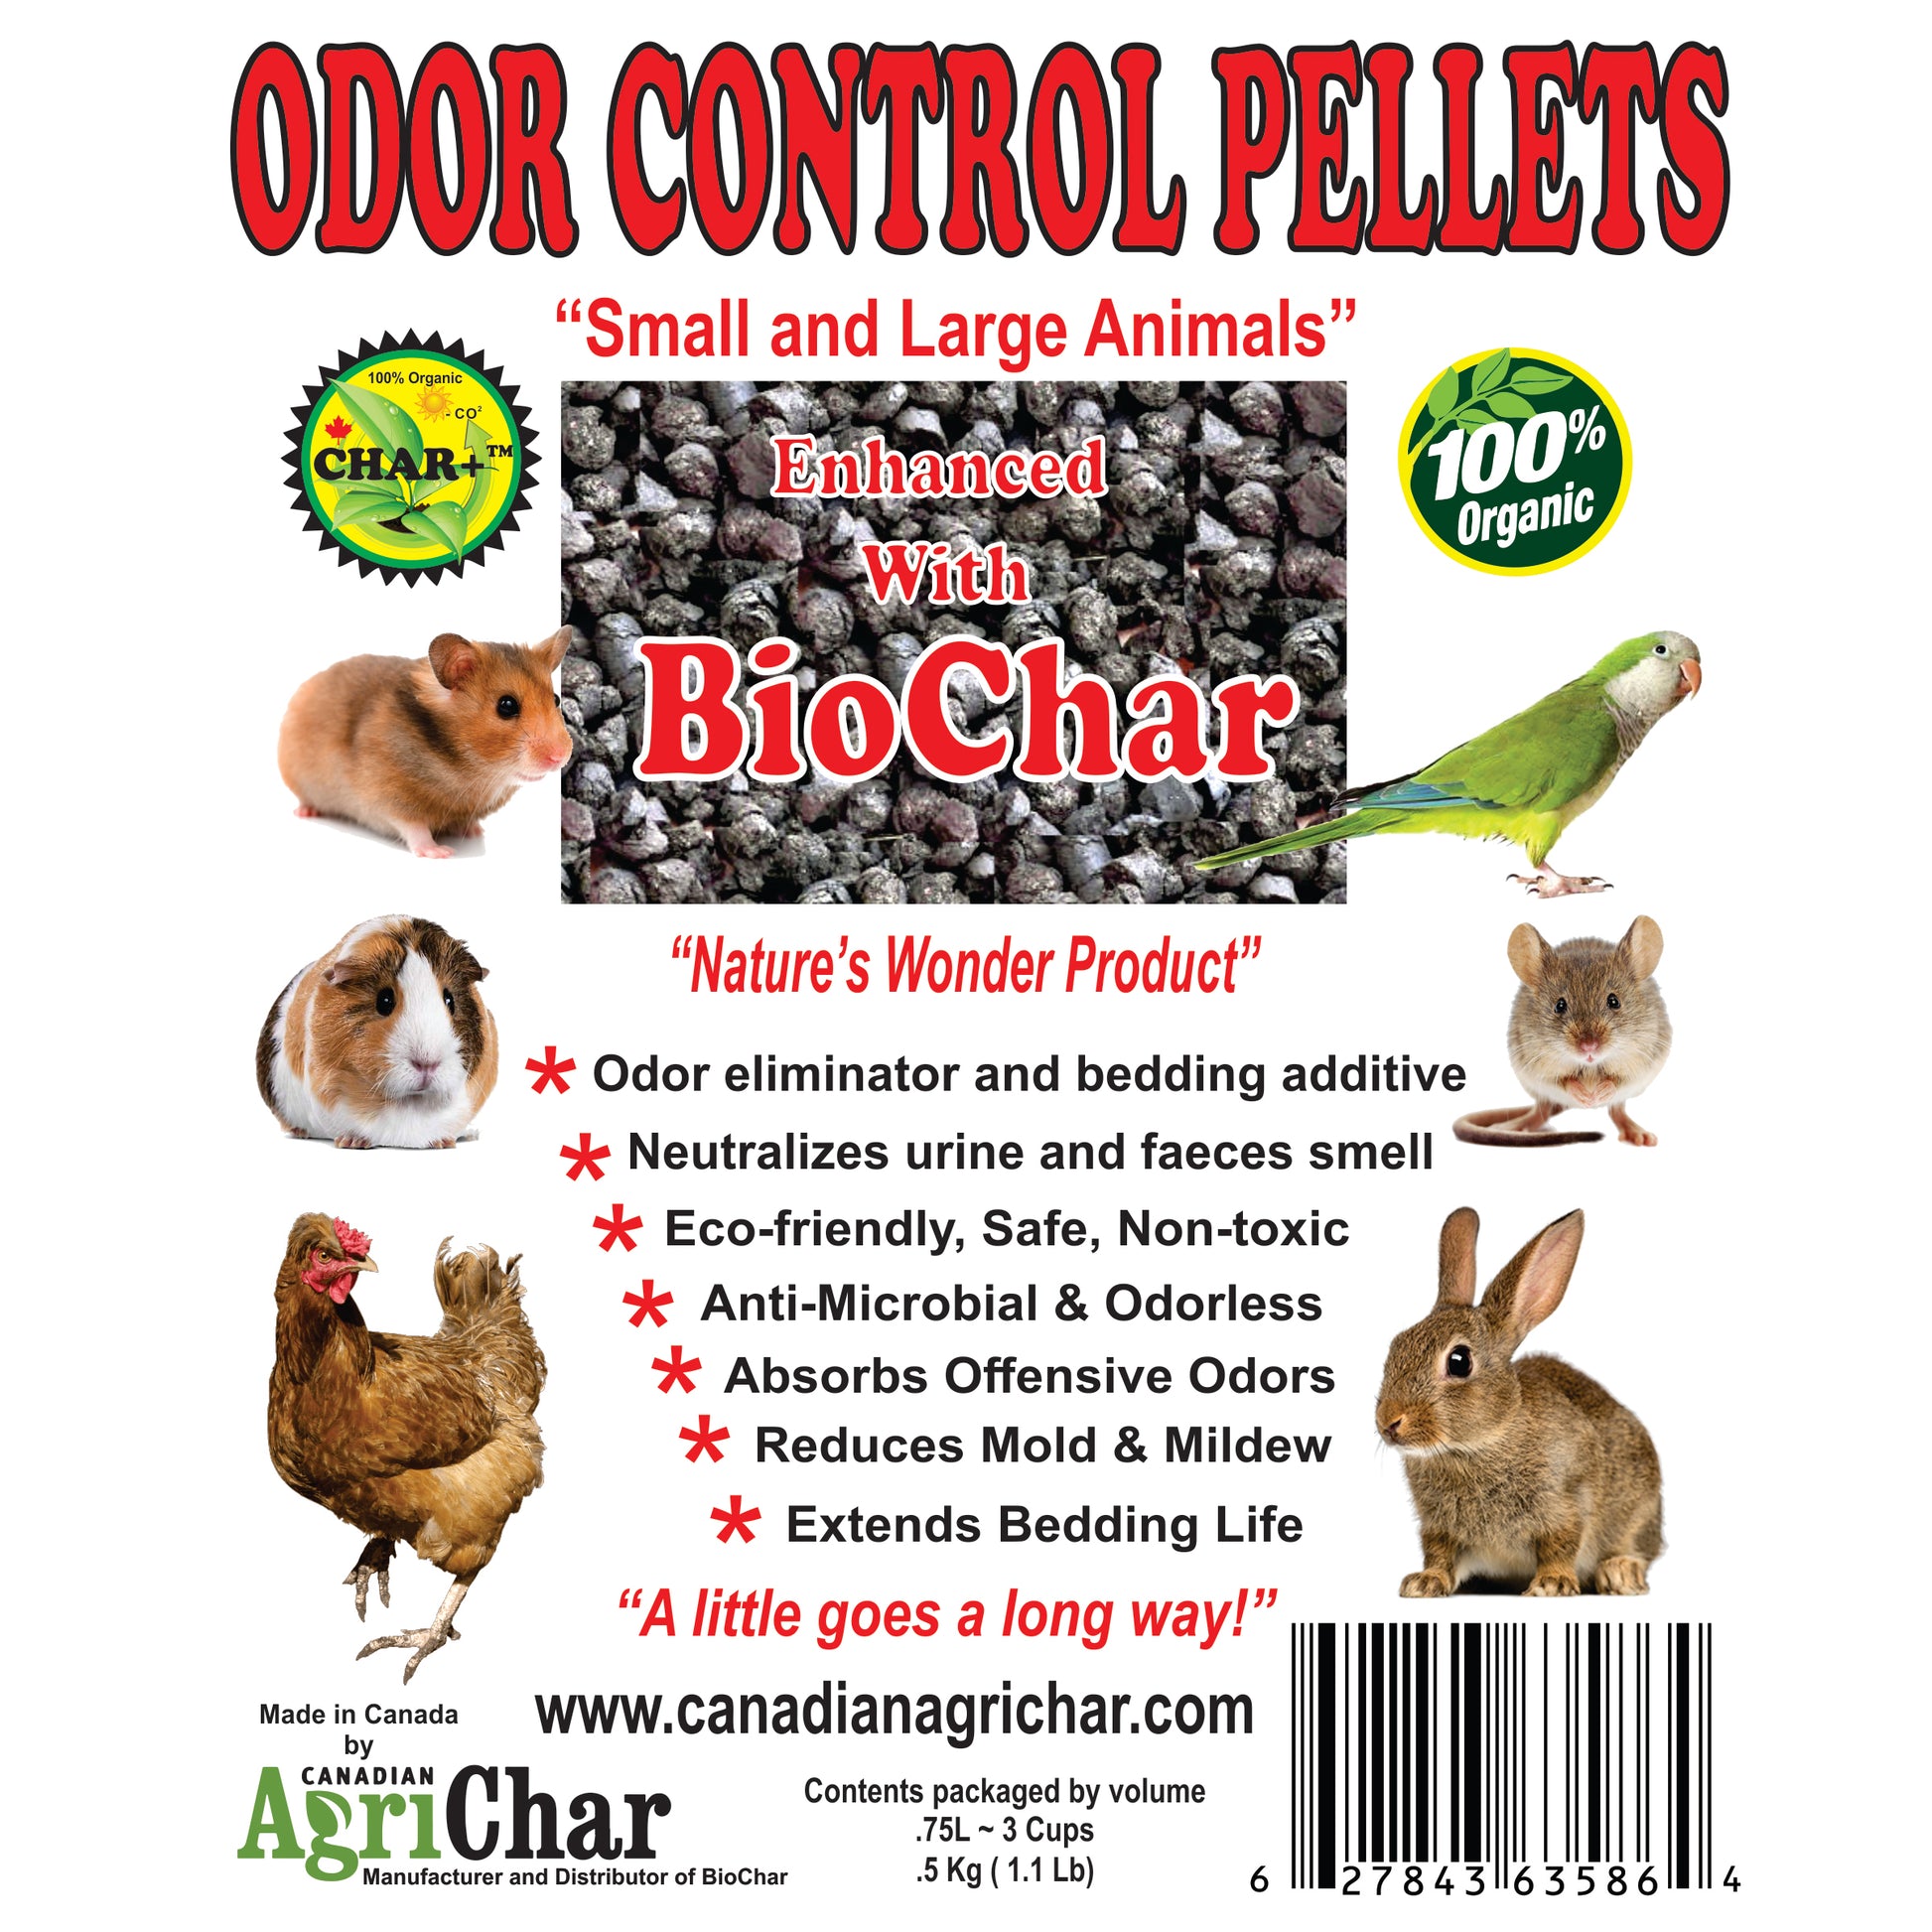 Odor Control Pellets to Neutralize Offensive Odors. Made in Canada